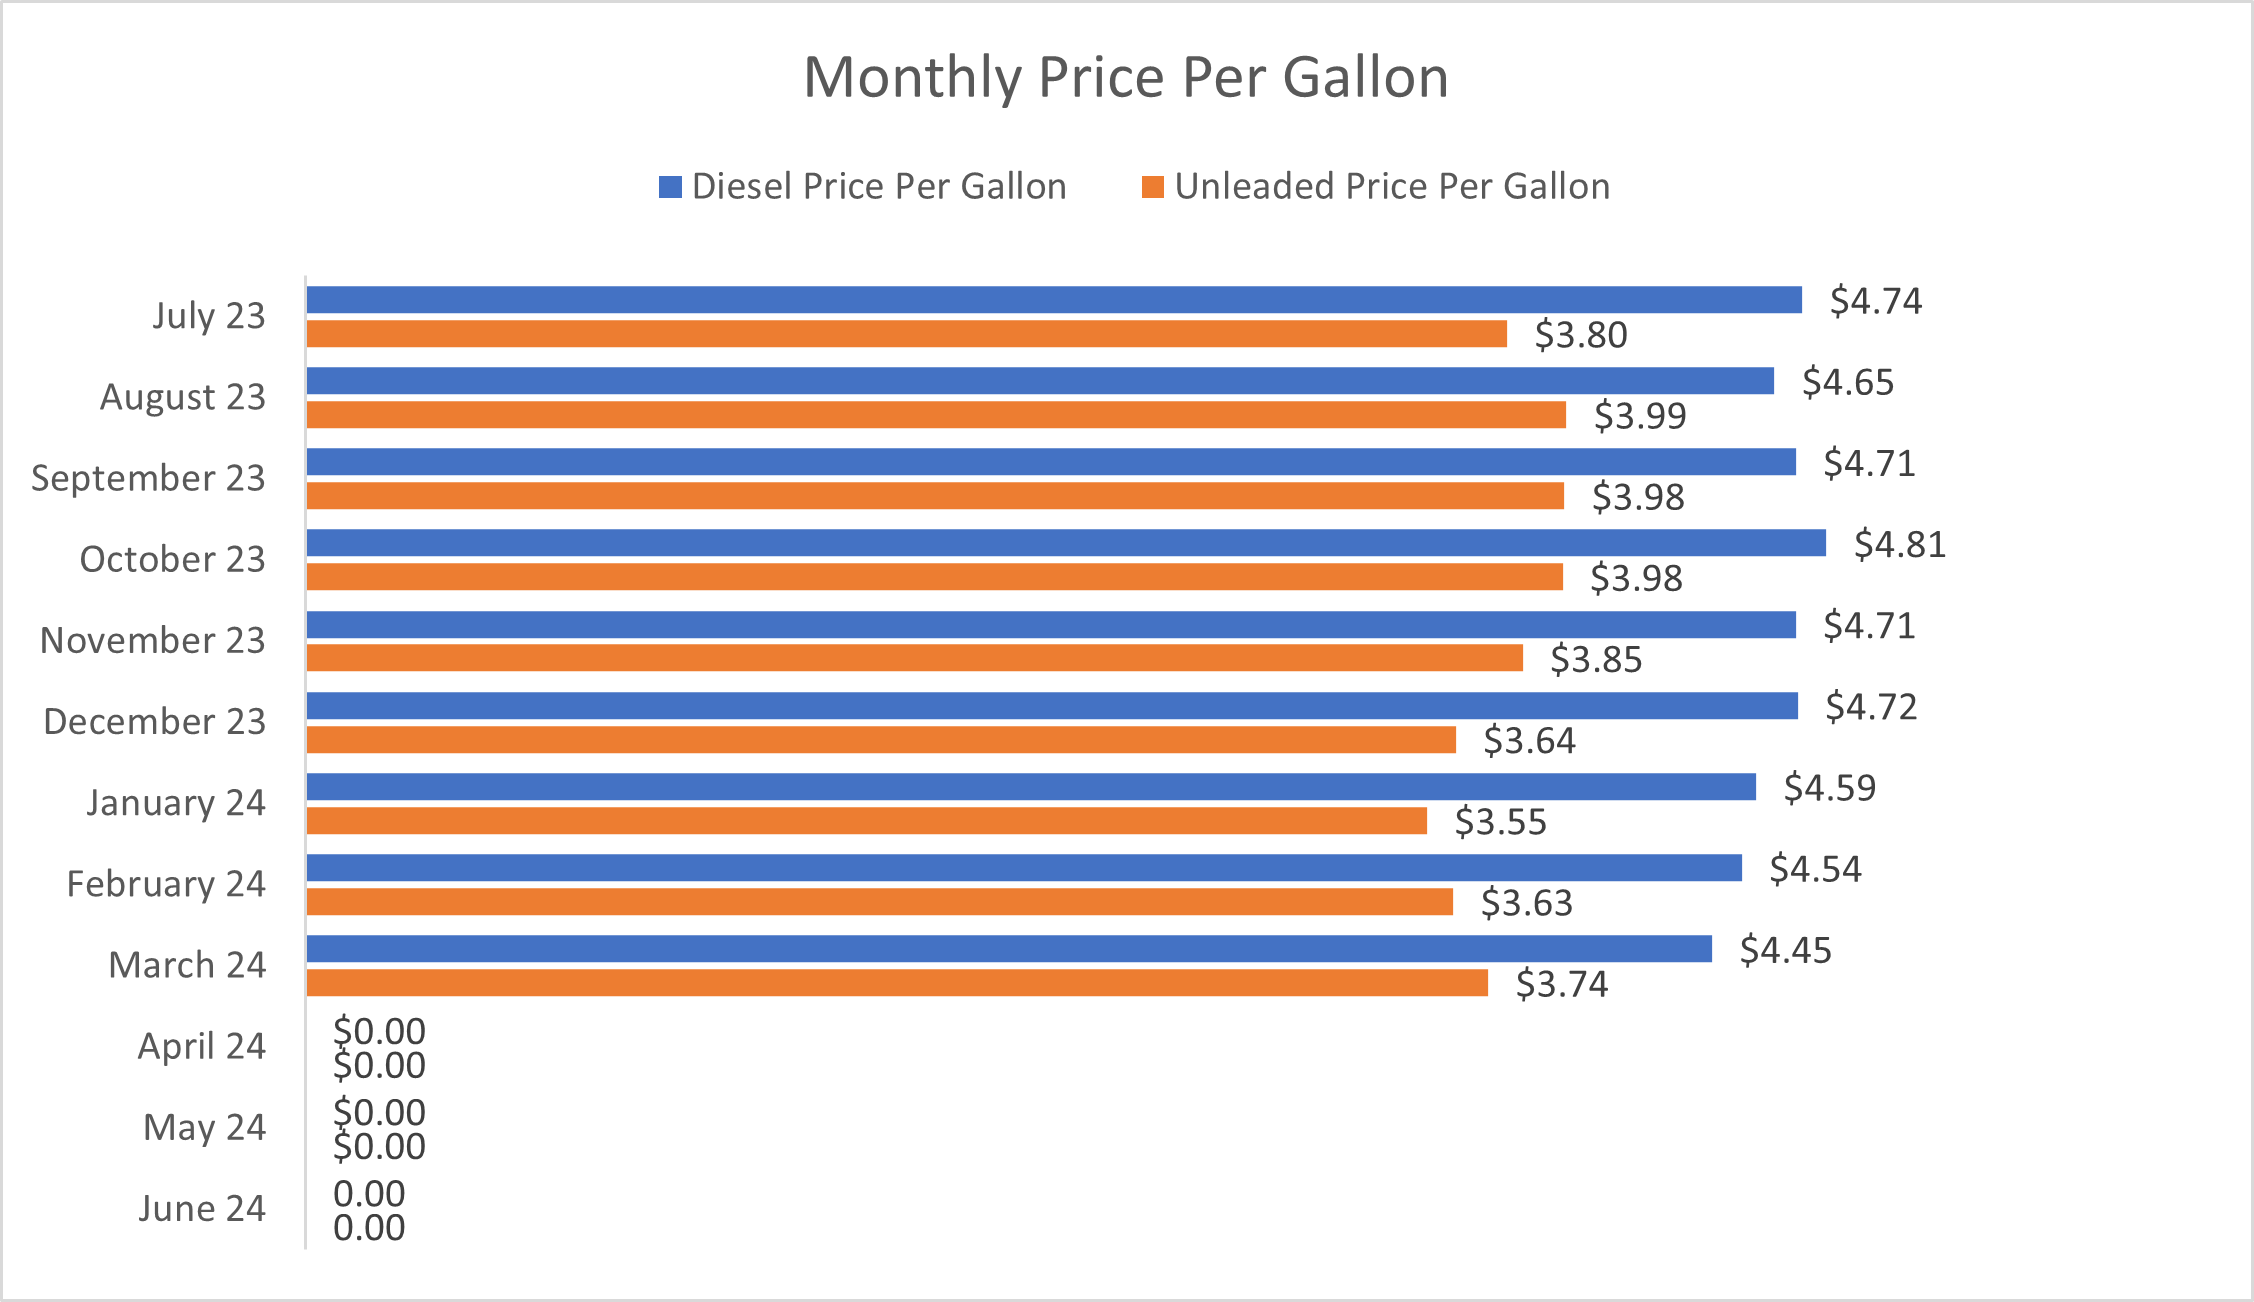 Bar chart indicating monthly price per gallon of diesel and unleaded fuel through March